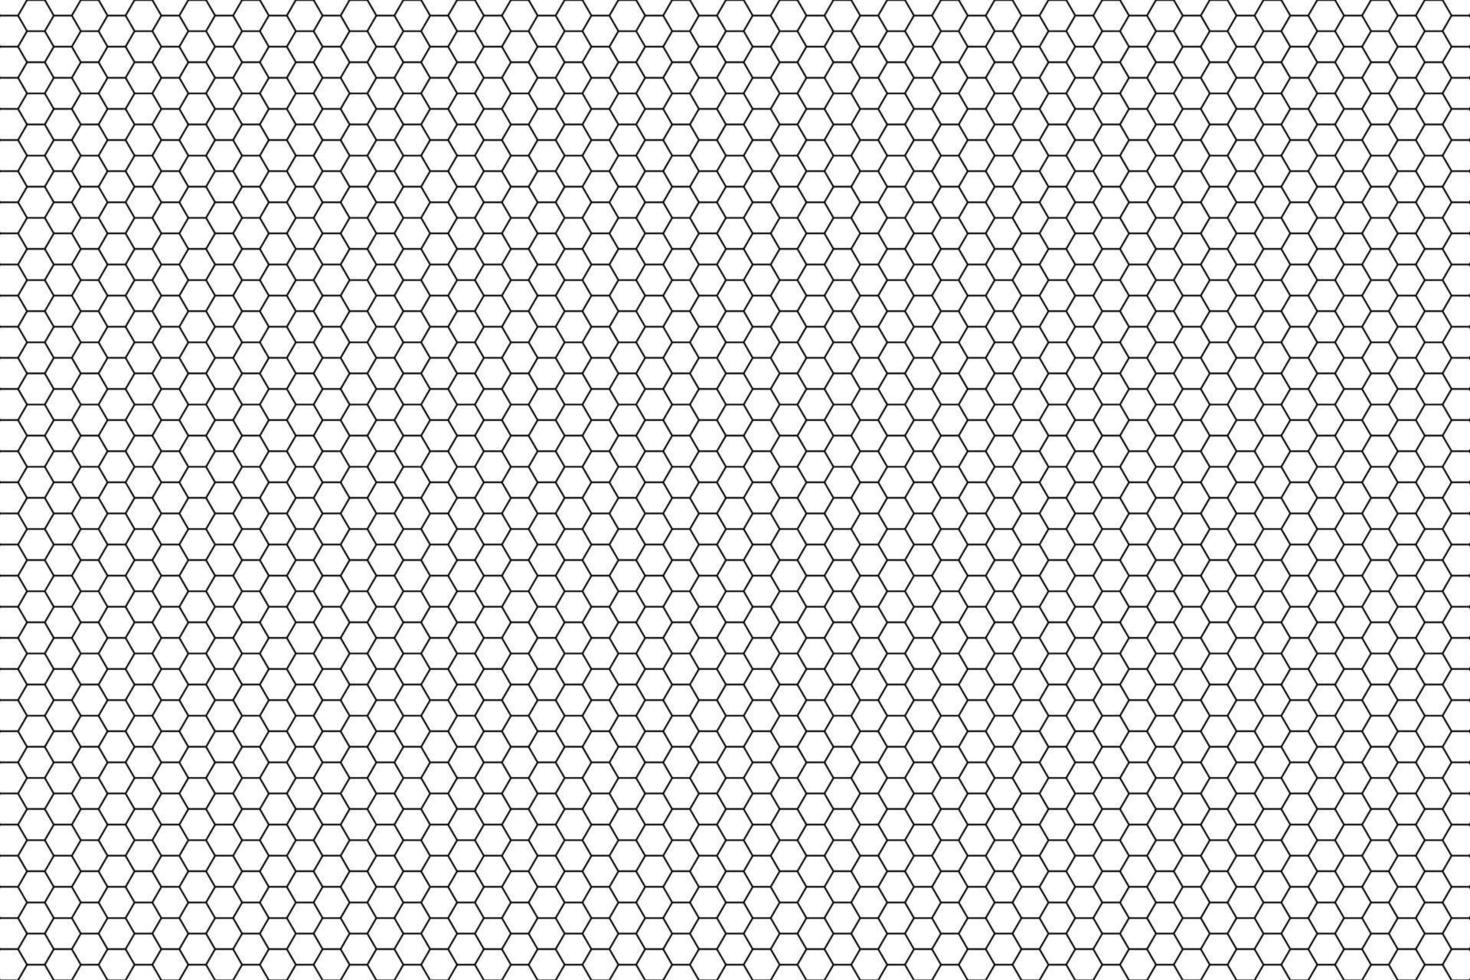 Vector Honeycomb line art background. Simple beehive pattern. vector illustration of flat geometric texture symbol. Hexagon, hexagonal sign or cell icon, Honey  bee hive. free vector.